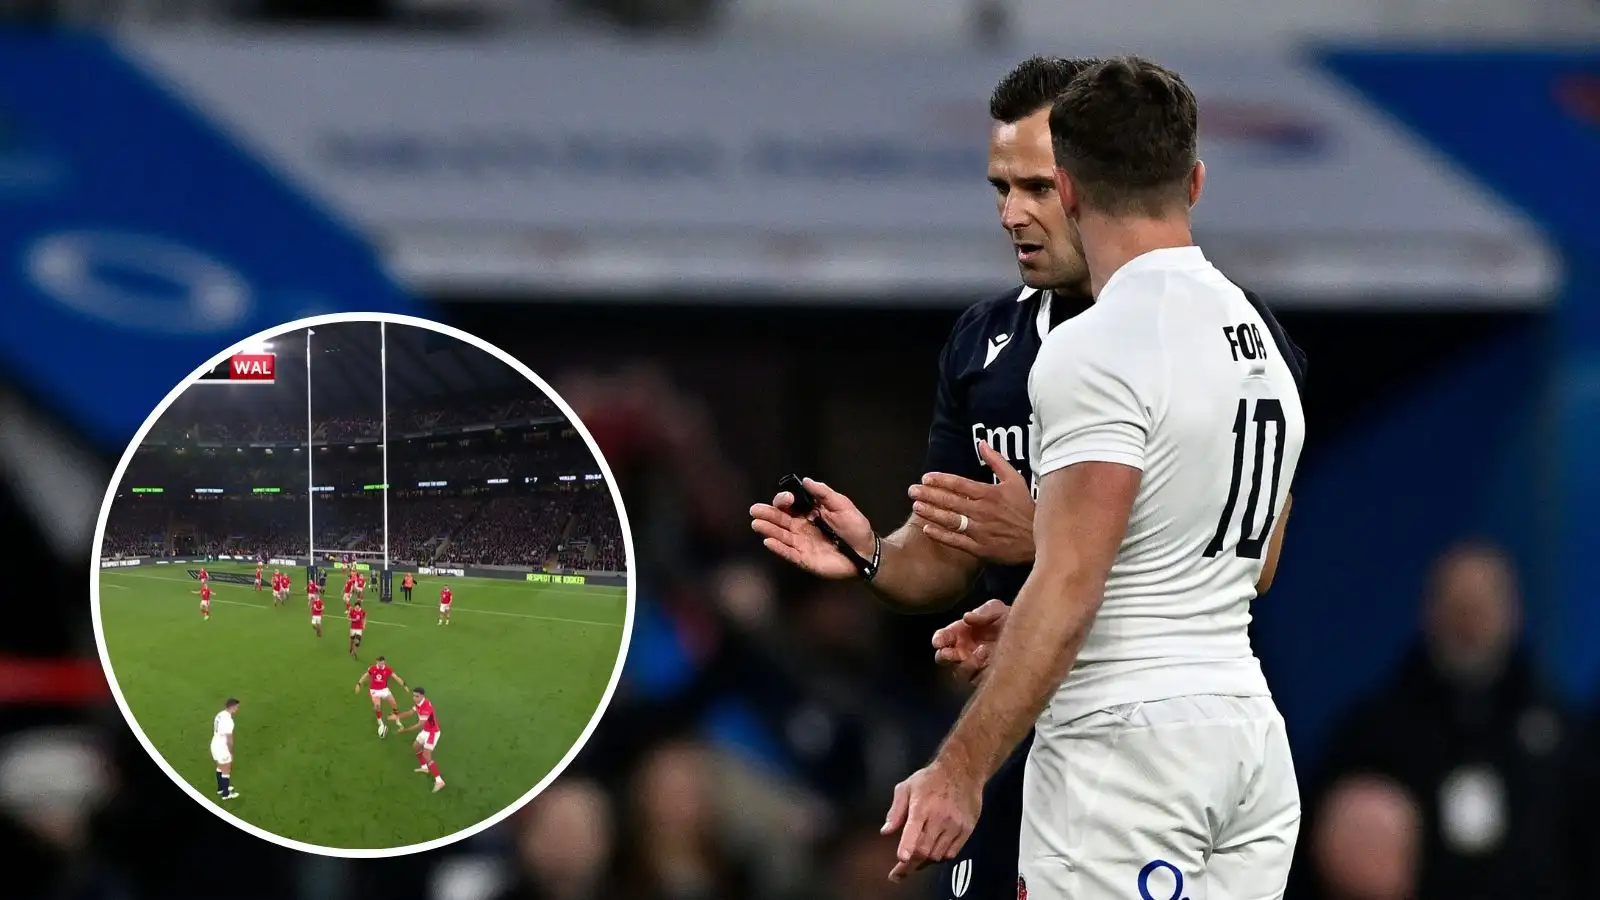 George Ford talks to referee James Doleman during England v Wales in the Six Nations at Twickenham.